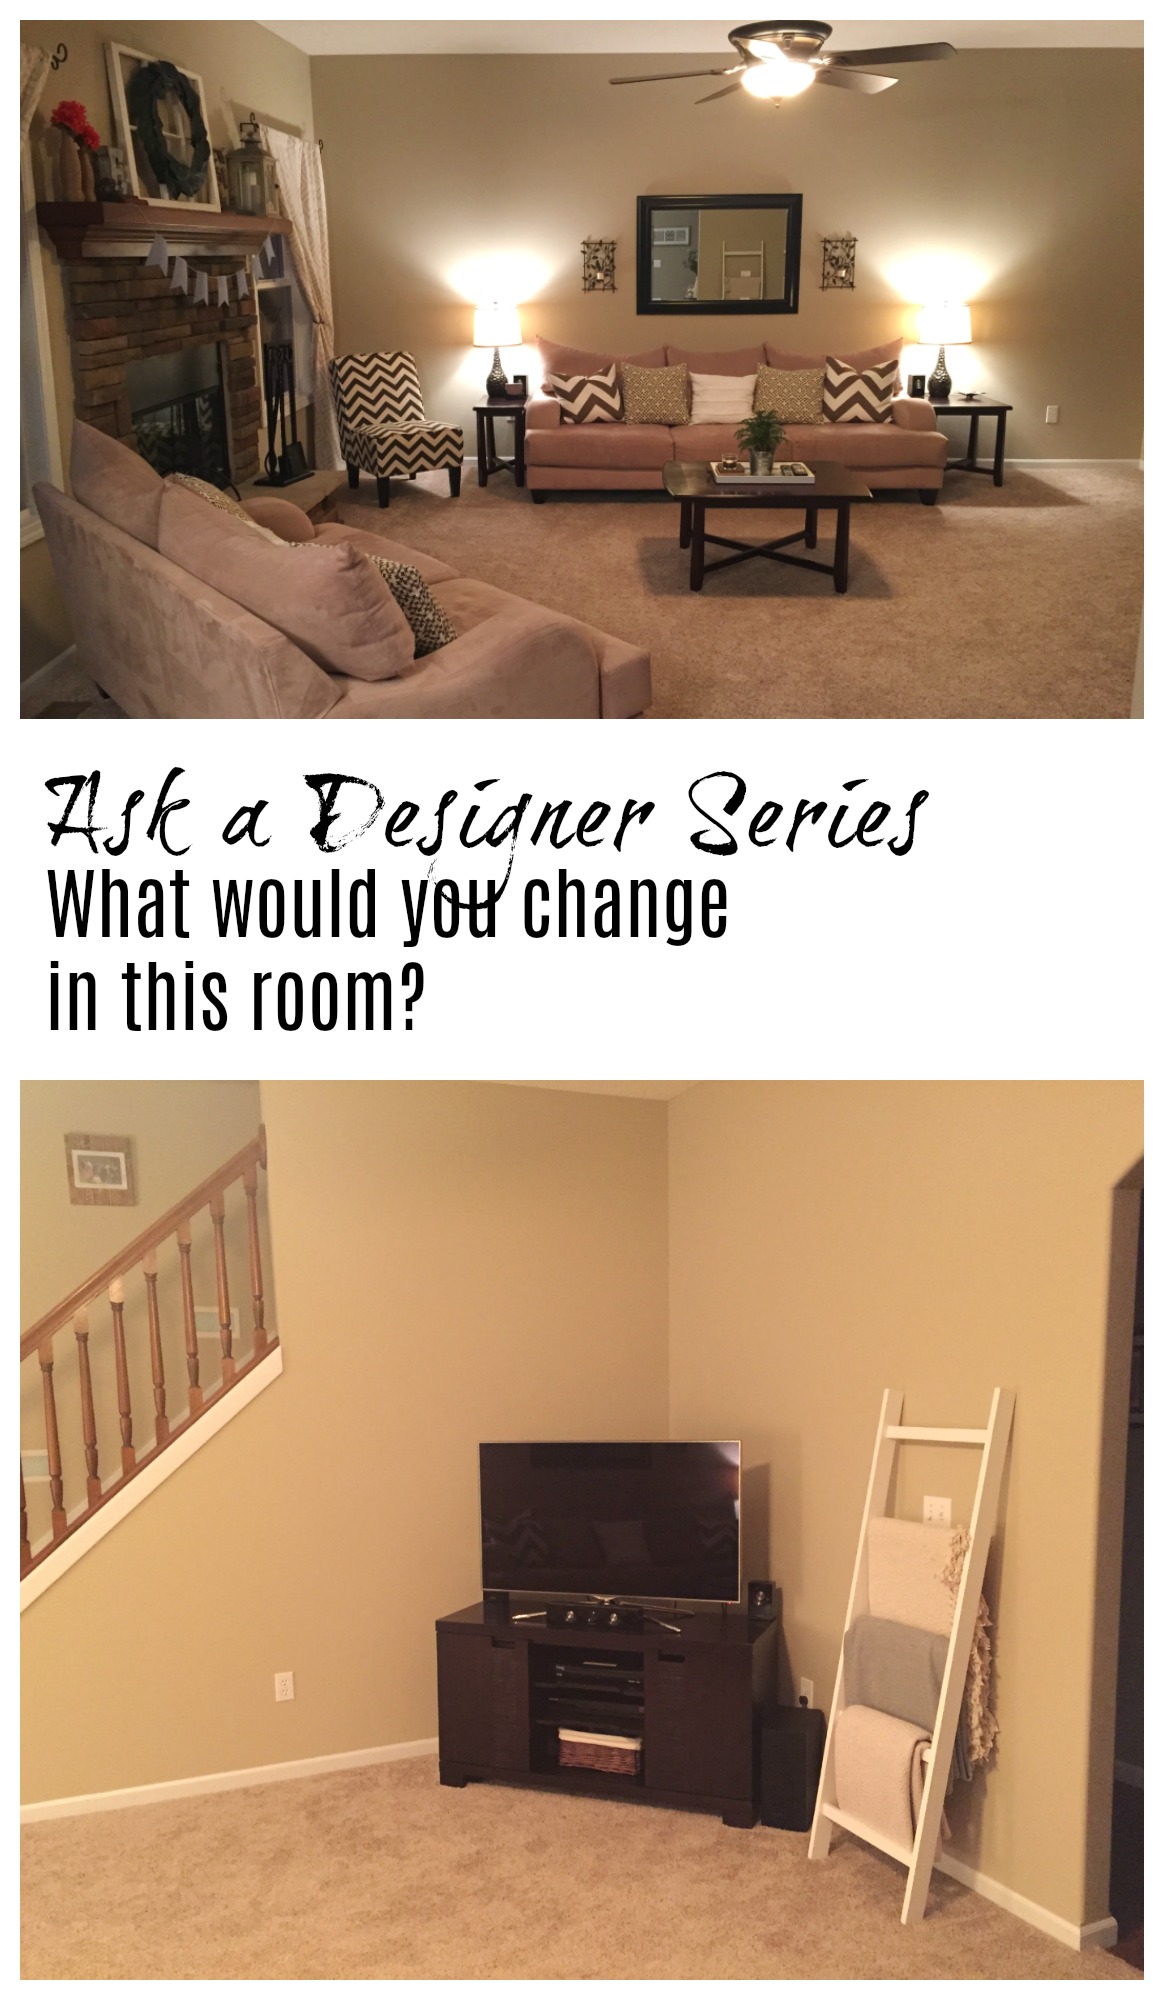 Ask a Desinger Series- See what a Designer Suggested!